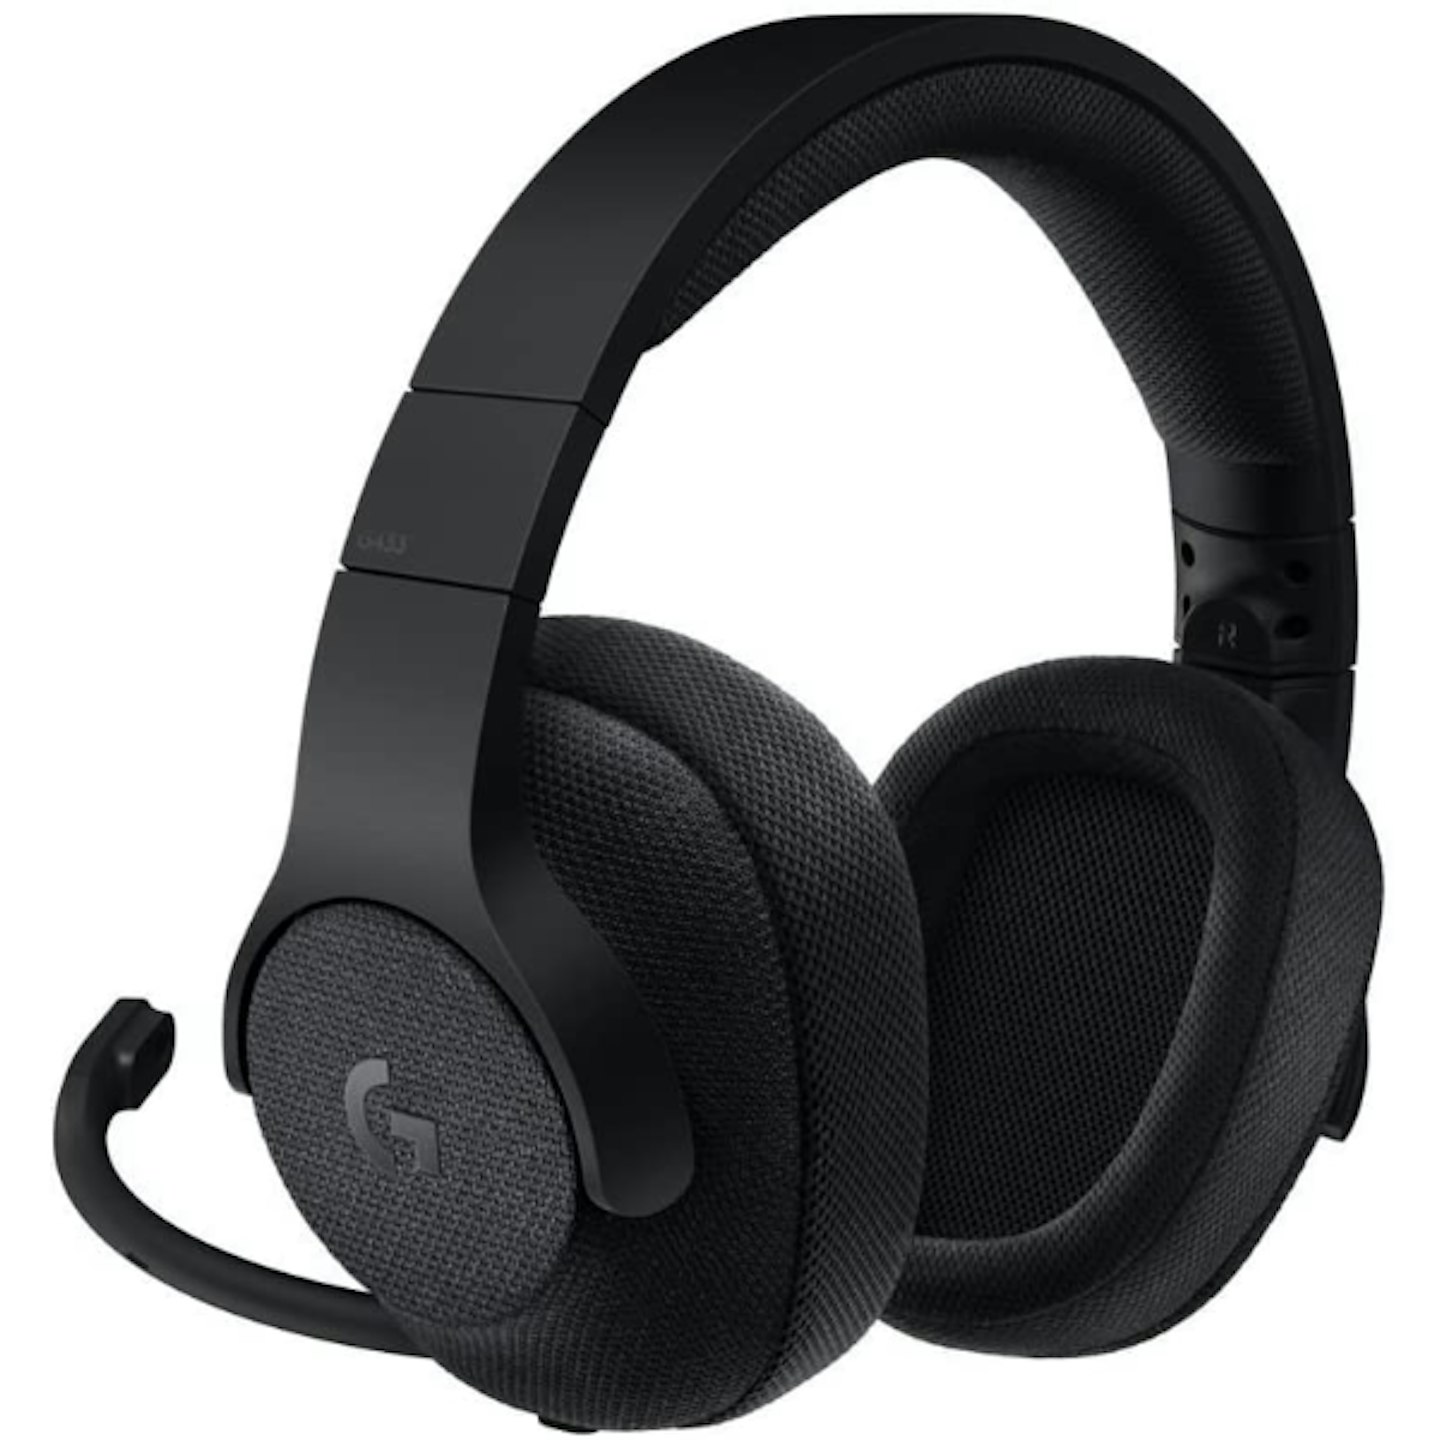 Logitech G433 Wired Gaming Headset